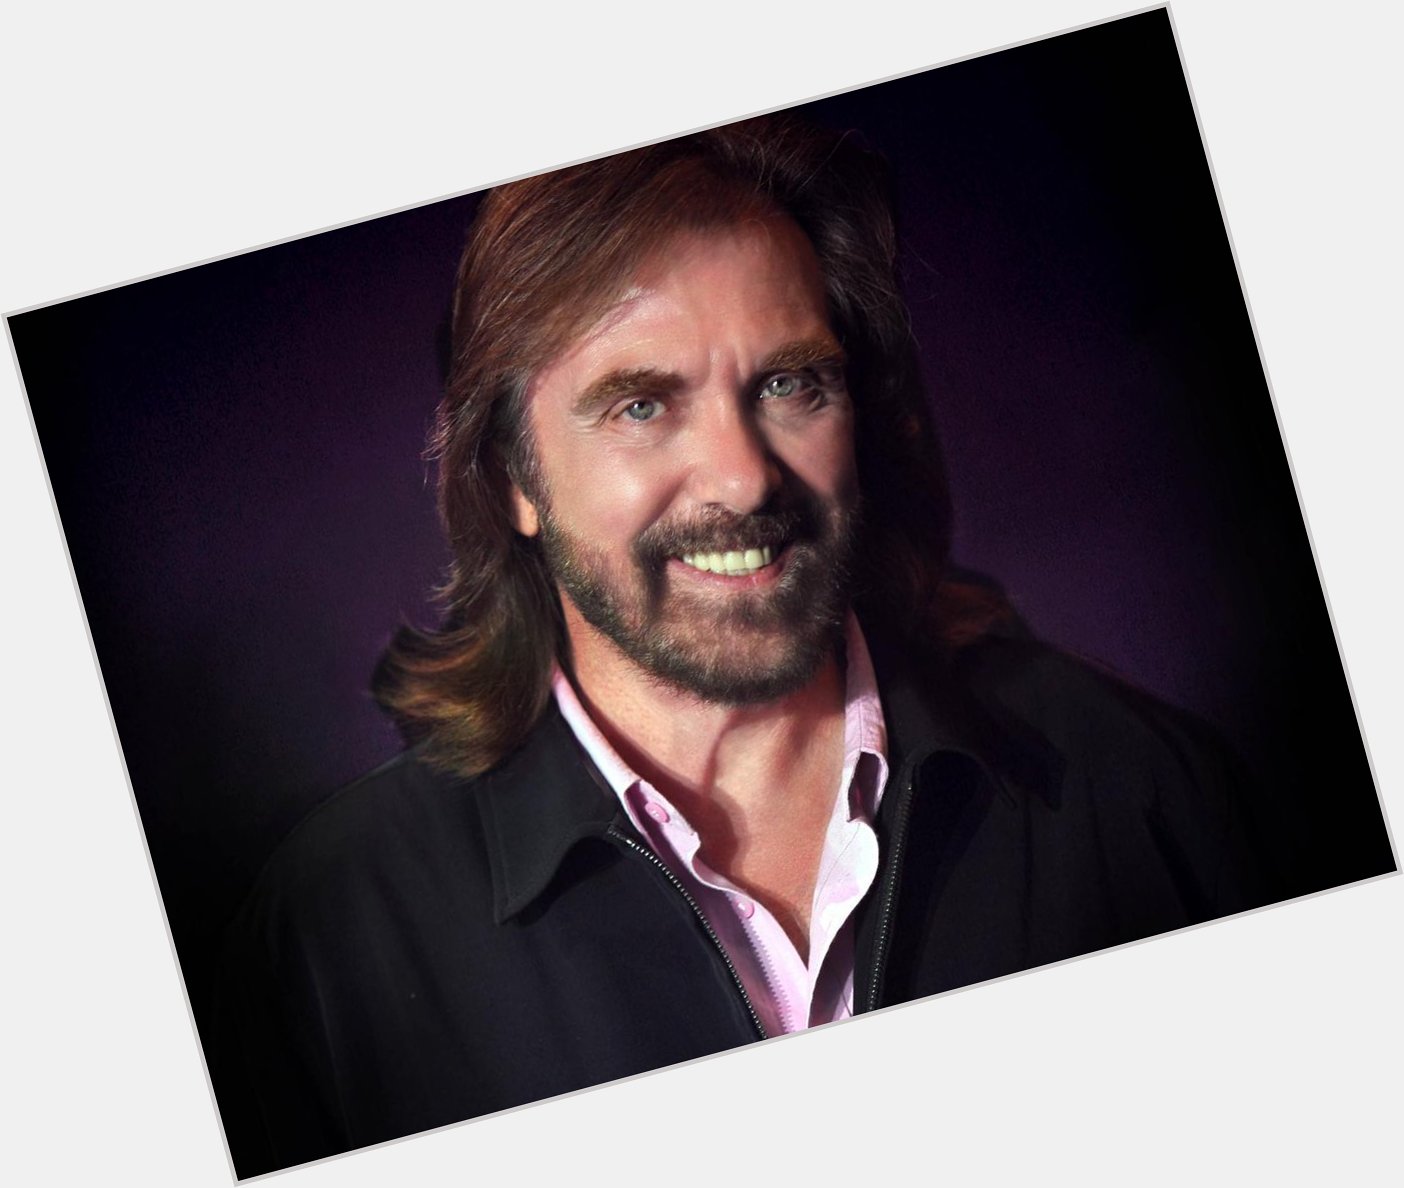 Happy Birthday to a guitarist who made life fun and helped with great songs. Dennis Locorriere with Dr. Hook. 